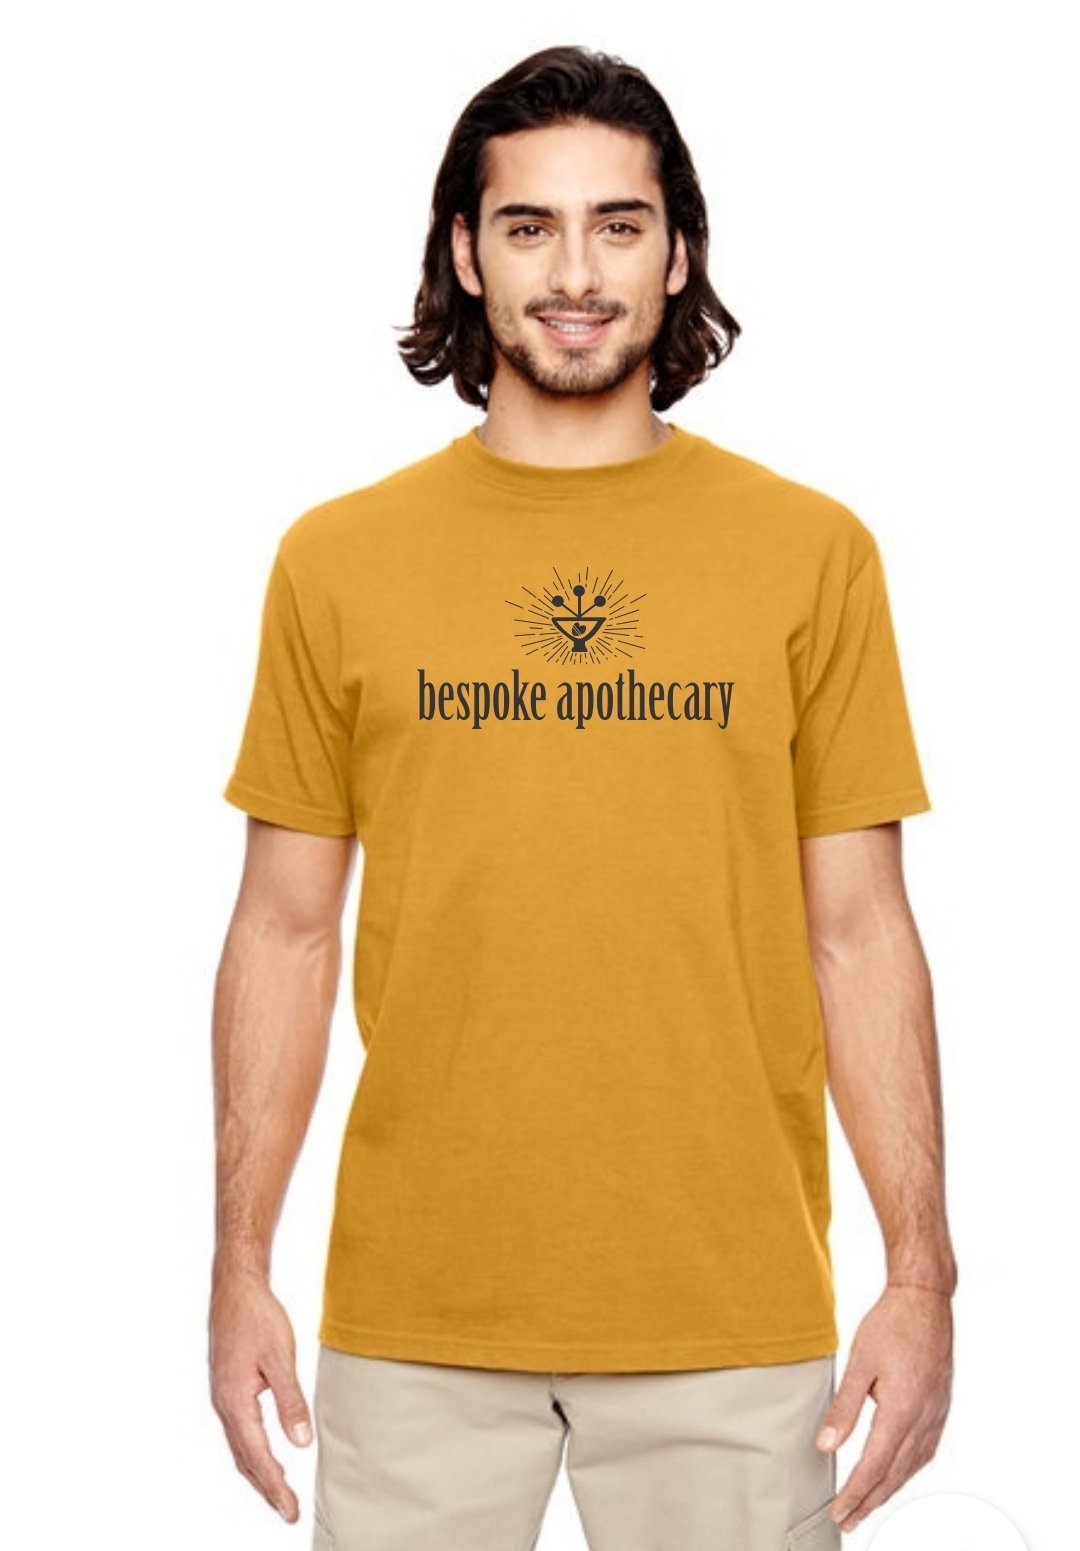 Image of CLEARANCE!!   Bespoke Apothecary limited batch (in BeeHive color!) Organic Cotton Tee!